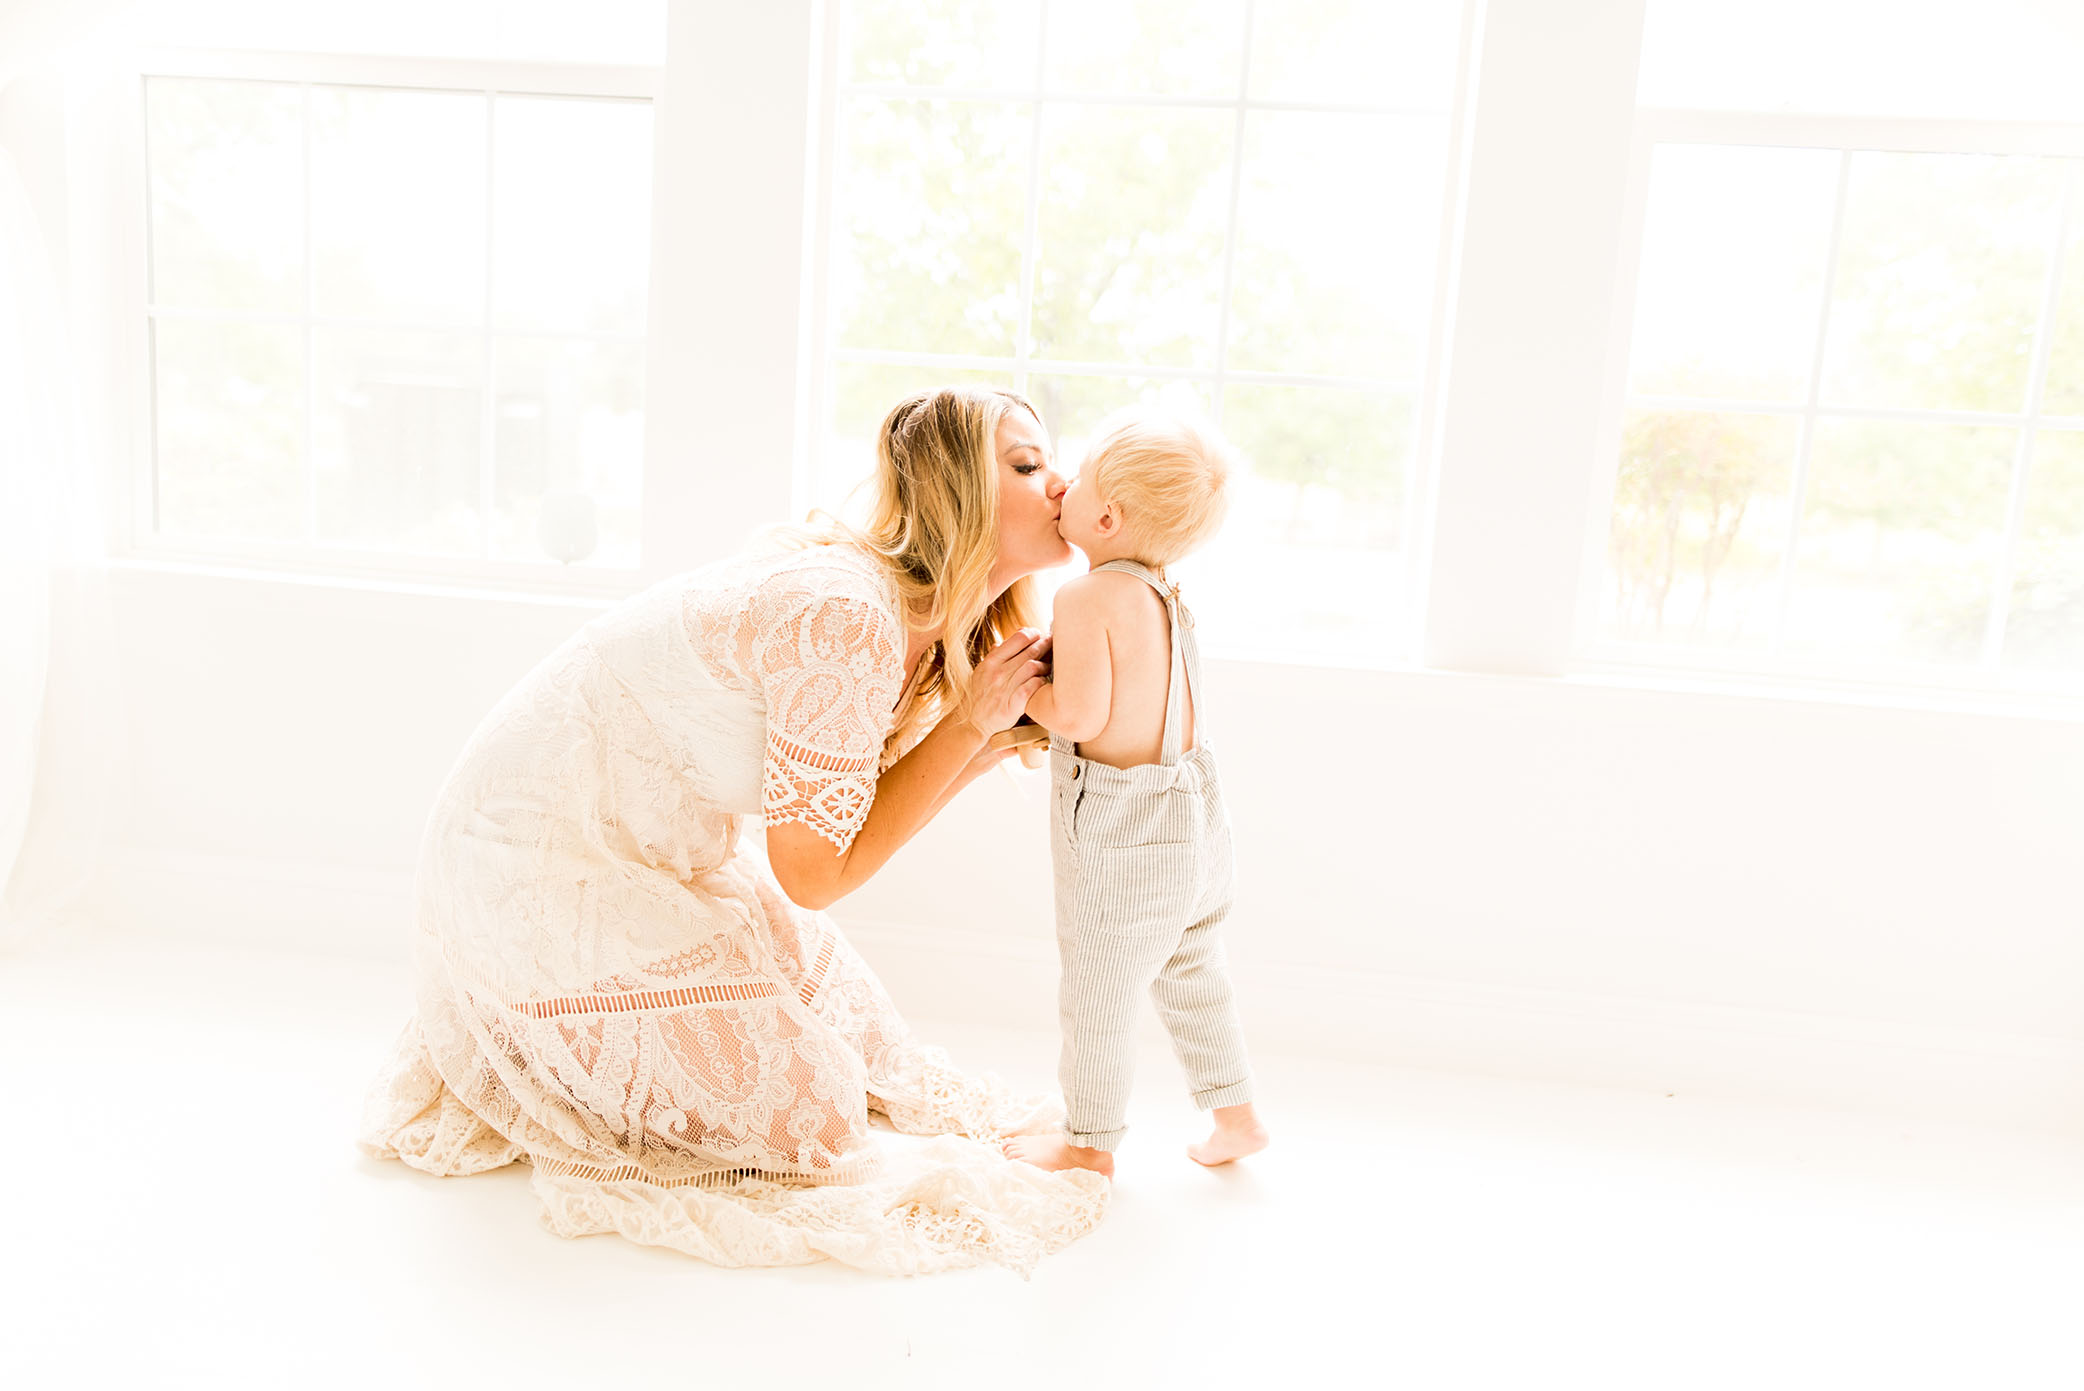 Mom steals kisses from son captured by Sweet Beginnings Photography by Stephanie